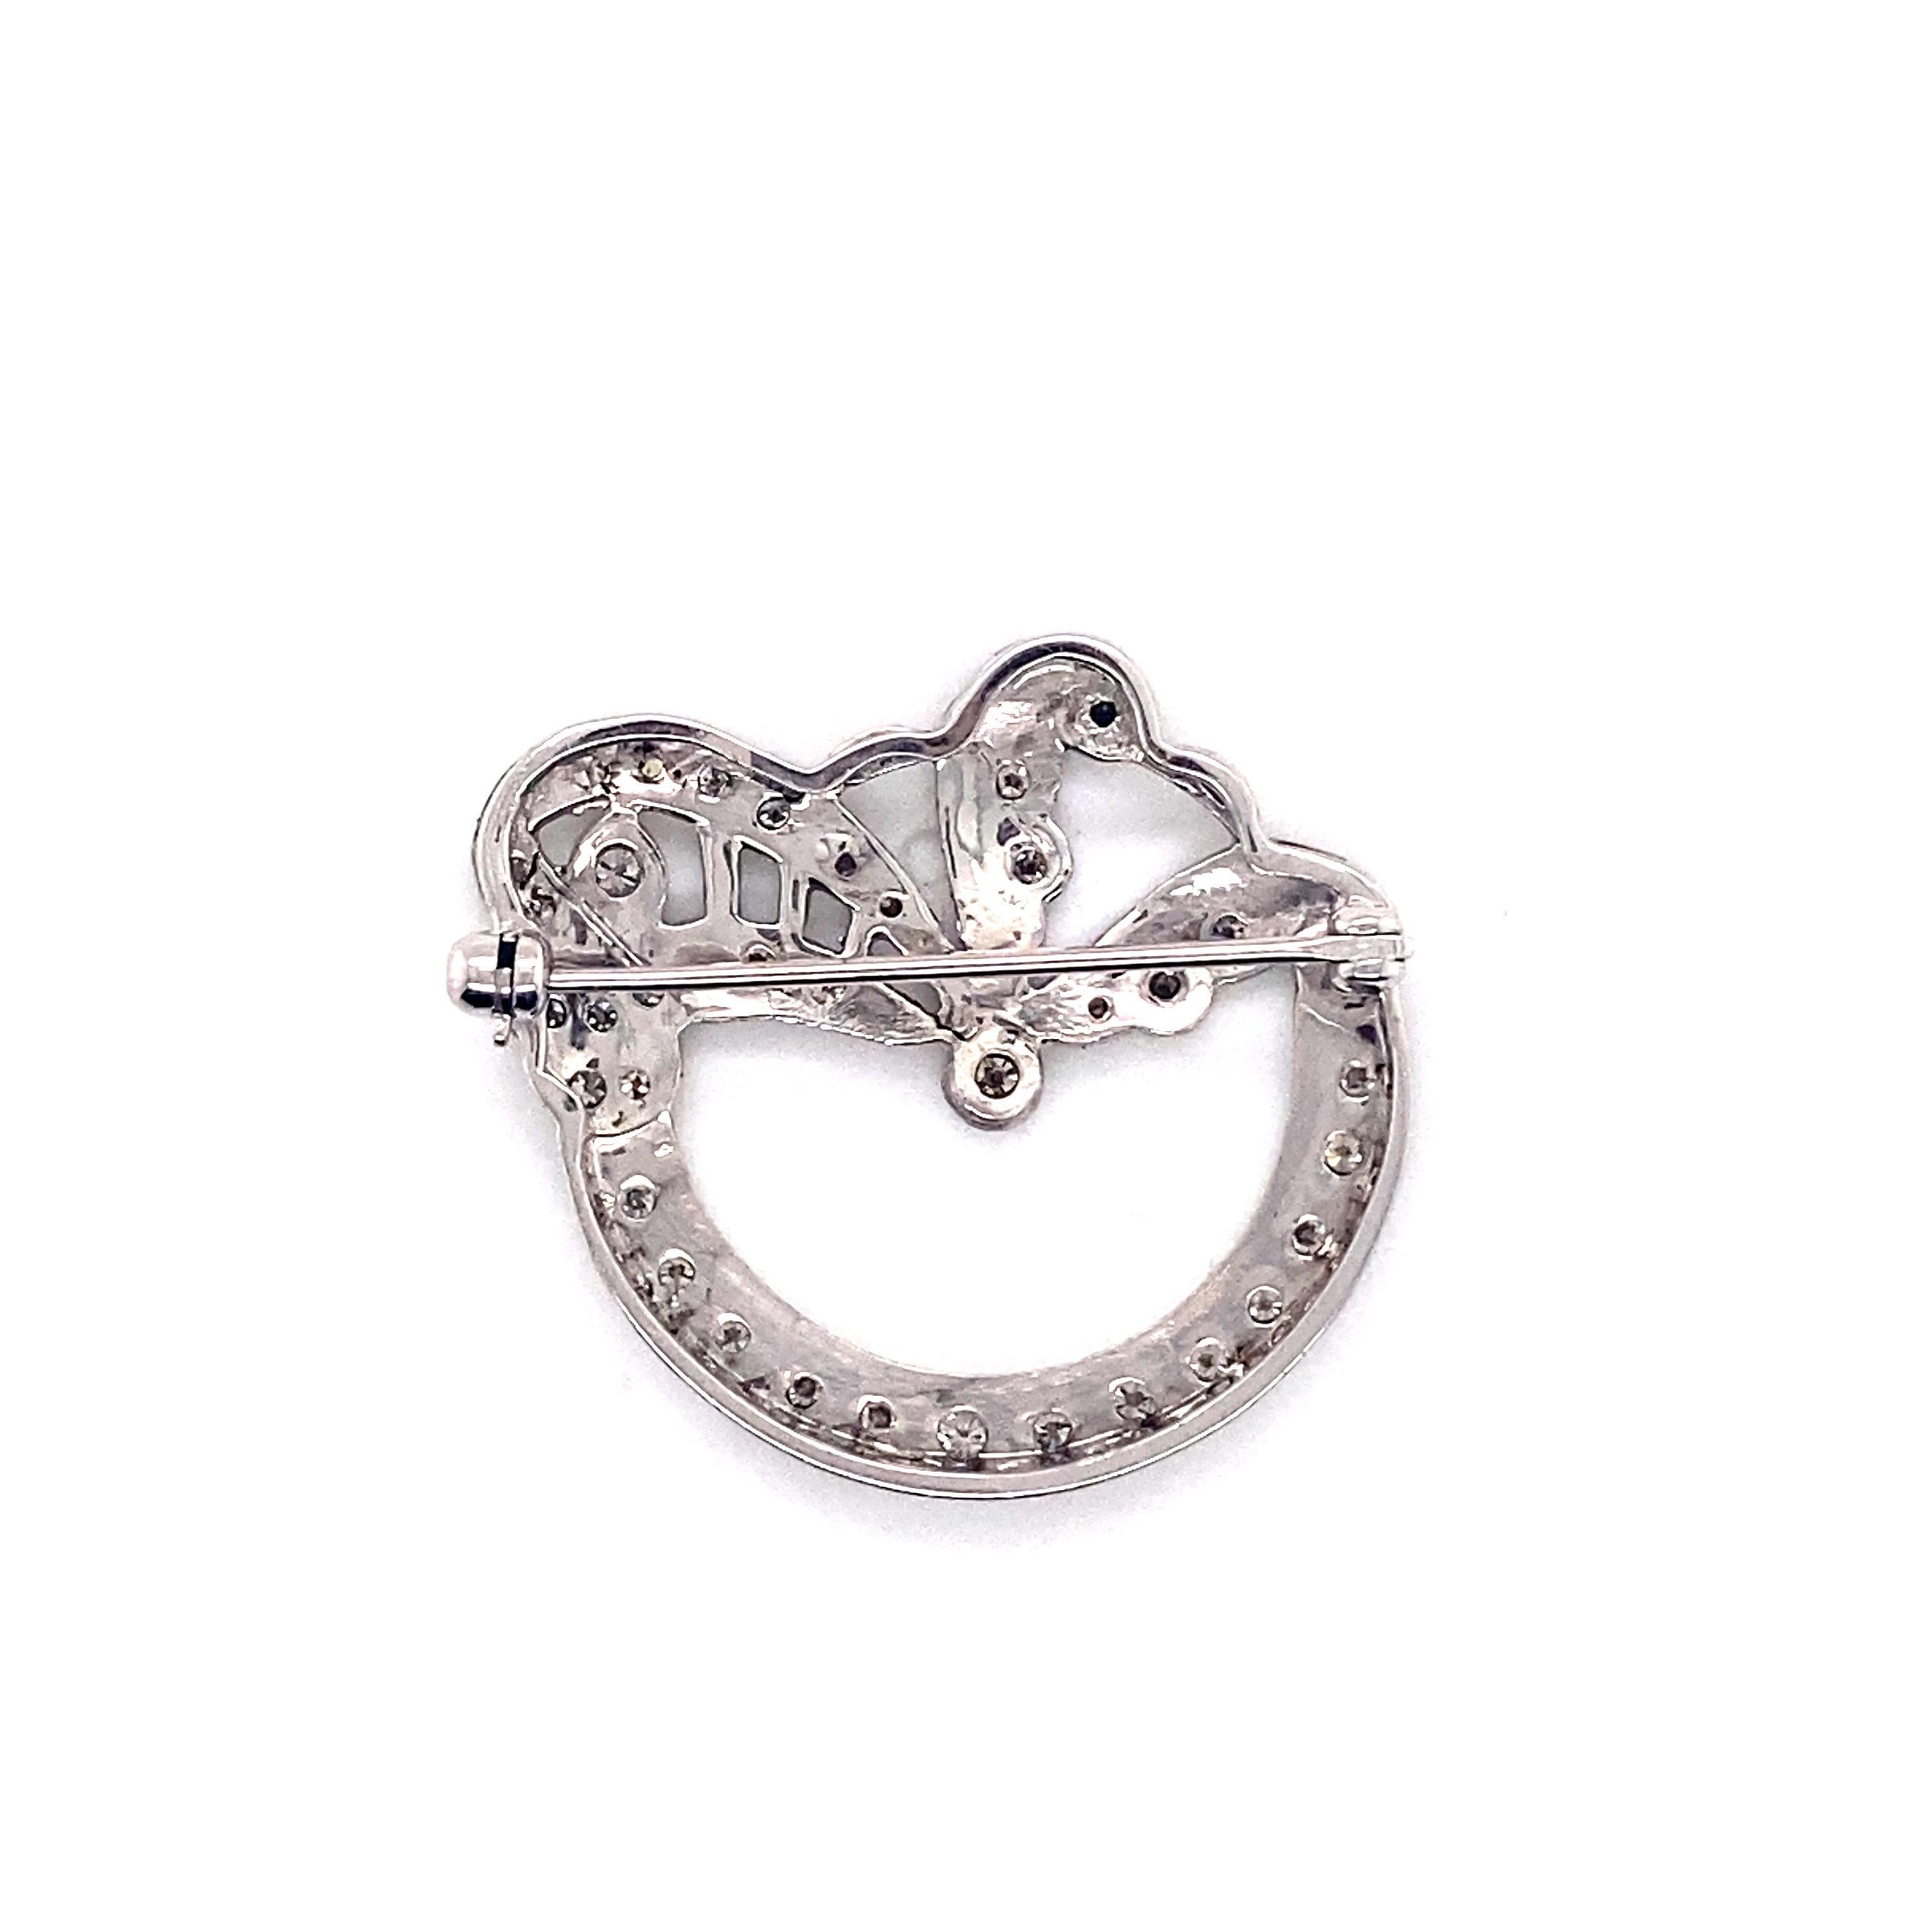 Vintage 1950’s 14k white gold diamond wreath pin - The pin is set with 35 round diamonds that weigh approximately .50ct. The diamond quality is H - I color, and VS2 - SI1 clarity. The pin measures 1.13in in diameter and weighs 4.91g